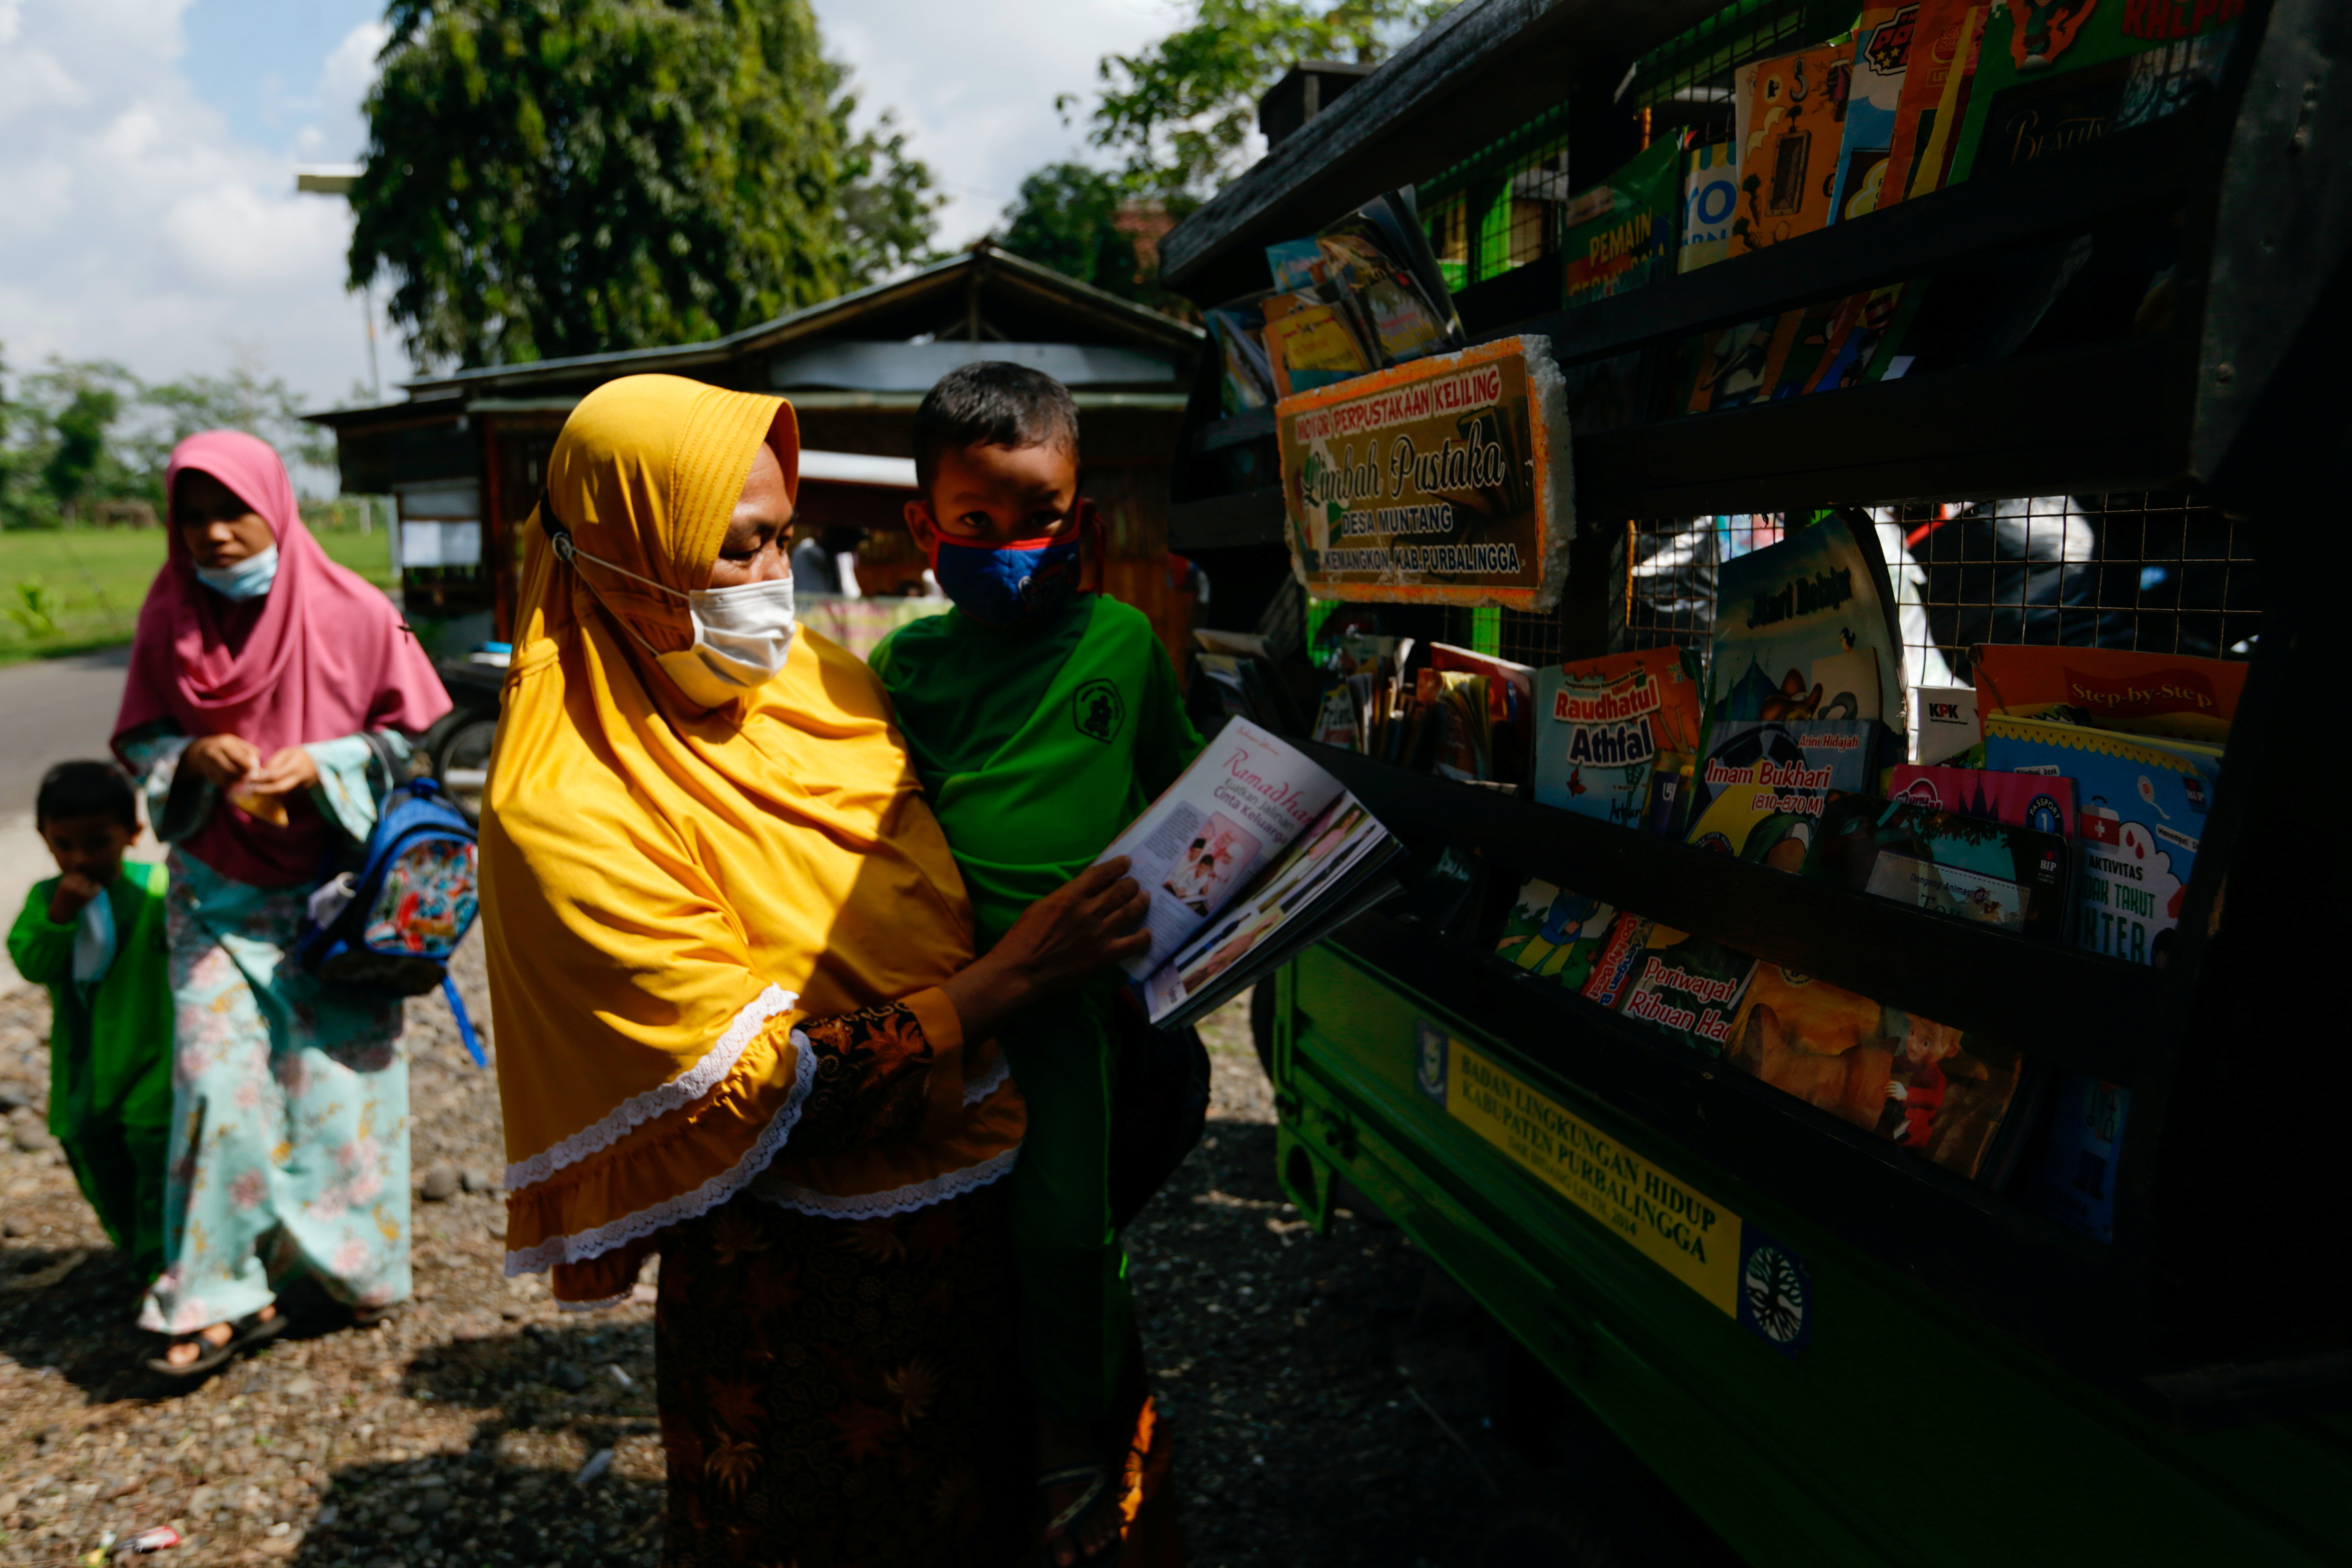 A woman carries a boy who chooses a book on the mobile library at a kindergarten in Muntang village, Purbalingga, Central Java province, Indonesia November 2, 2021. REUTERS/Ajeng Dinar Ulfiana